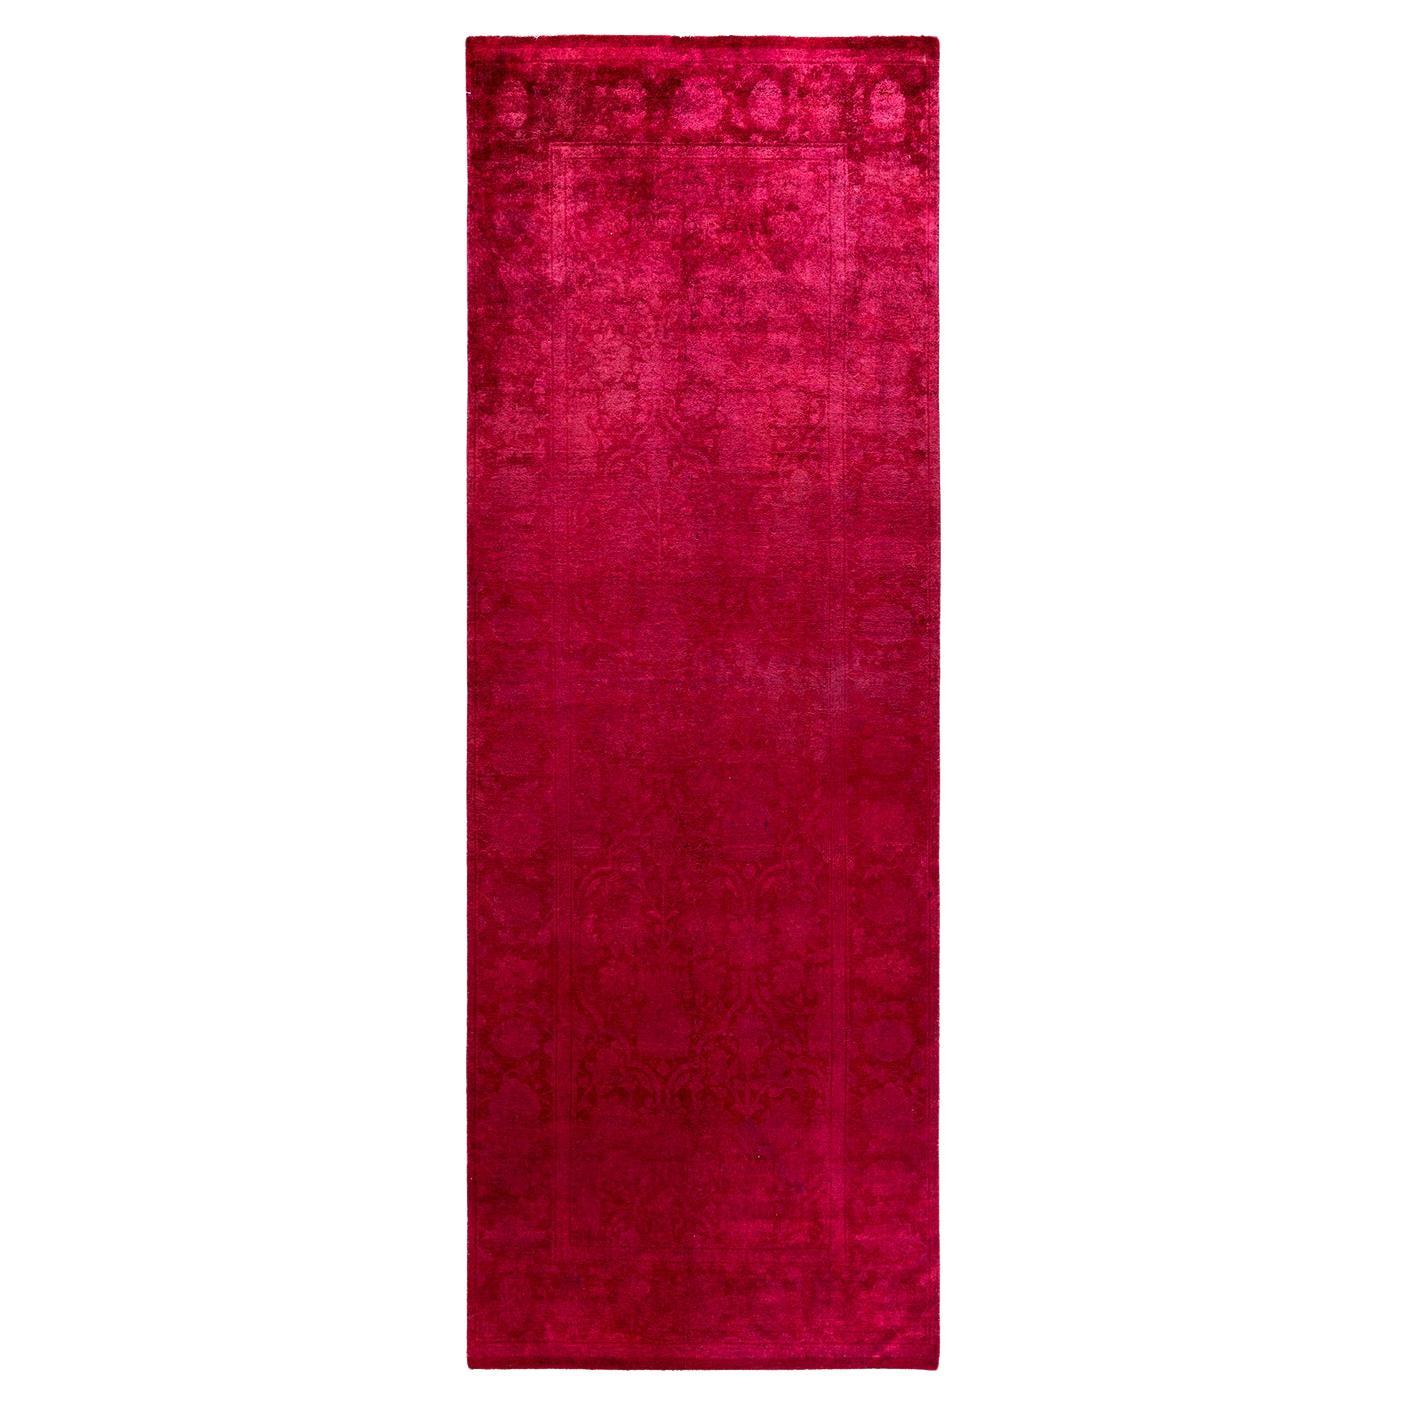 Contemporary Vibrance Hand Knotted Wool Pink Area Rug